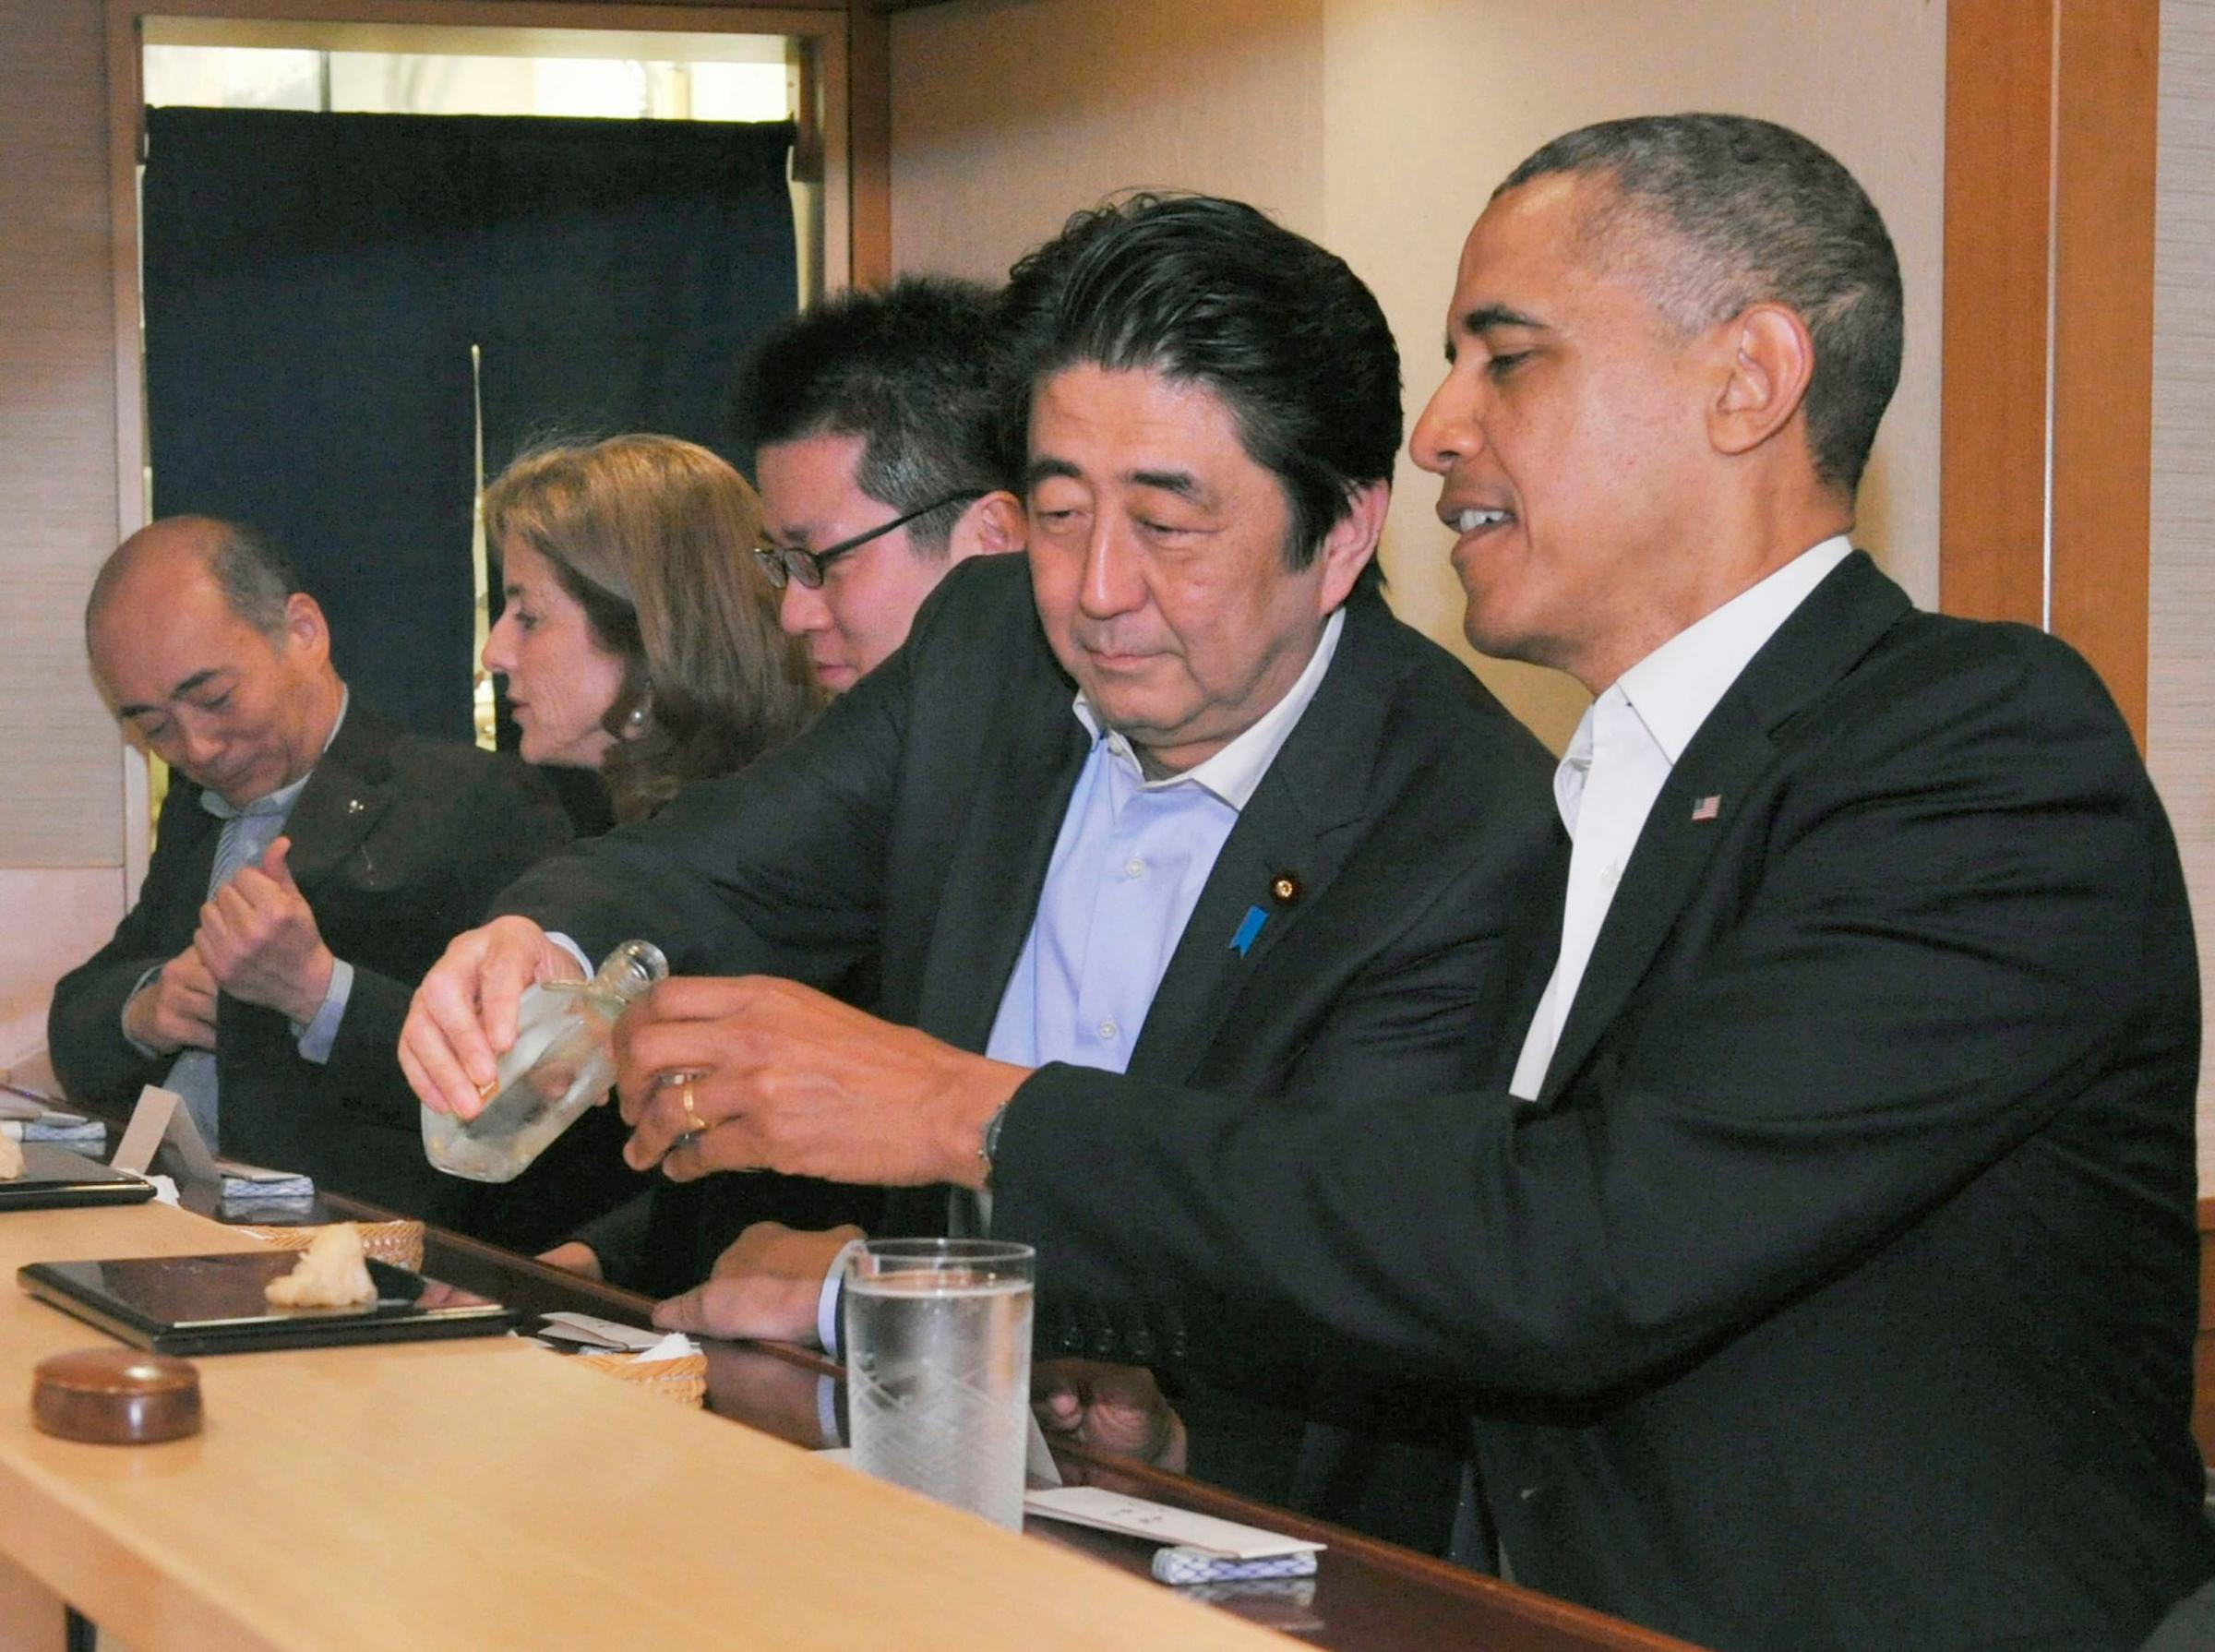 From left: Japan's Prime Minister Shizo Abe fills the glass of U.S. President Barak Obama during a dinner at Sukiyabashi Jiro sushi restaurant in Tokyo's Ginza district on April 23, 2014.